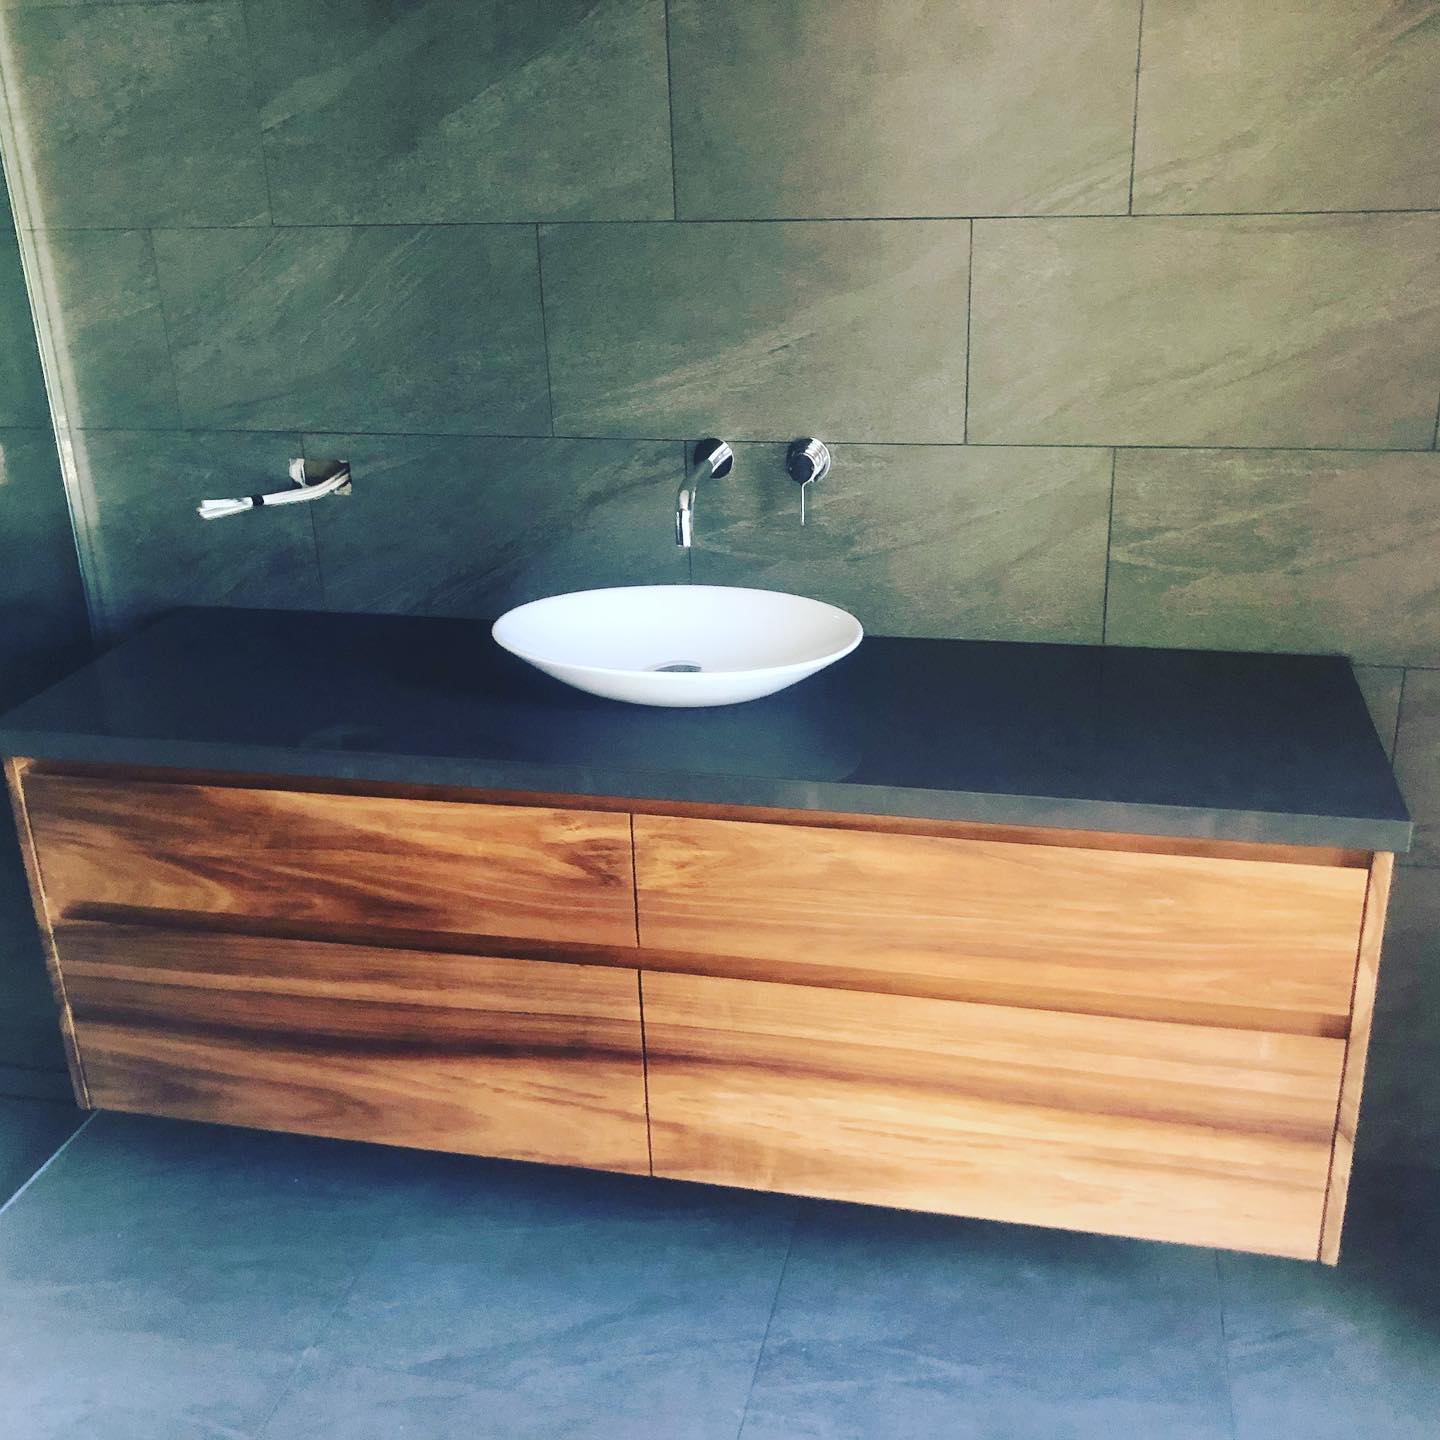 Stone and timber vanity